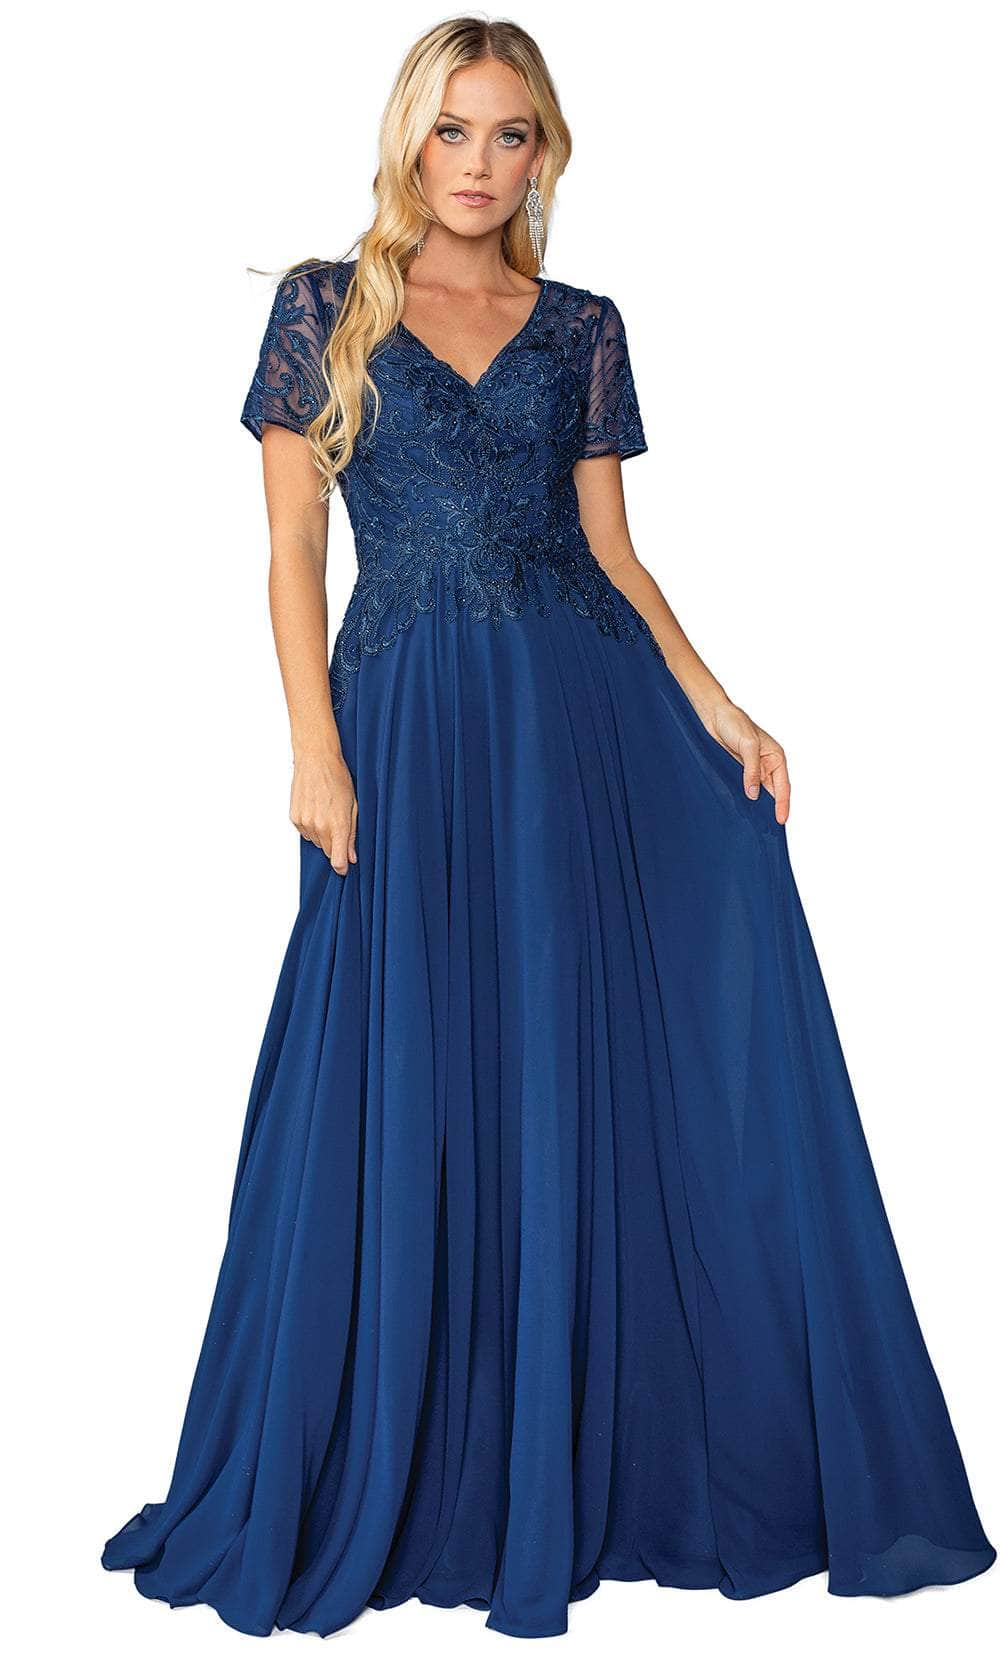 Image of Dancing Queen 4445 - Short Sleeve Embroidered Prom Dress